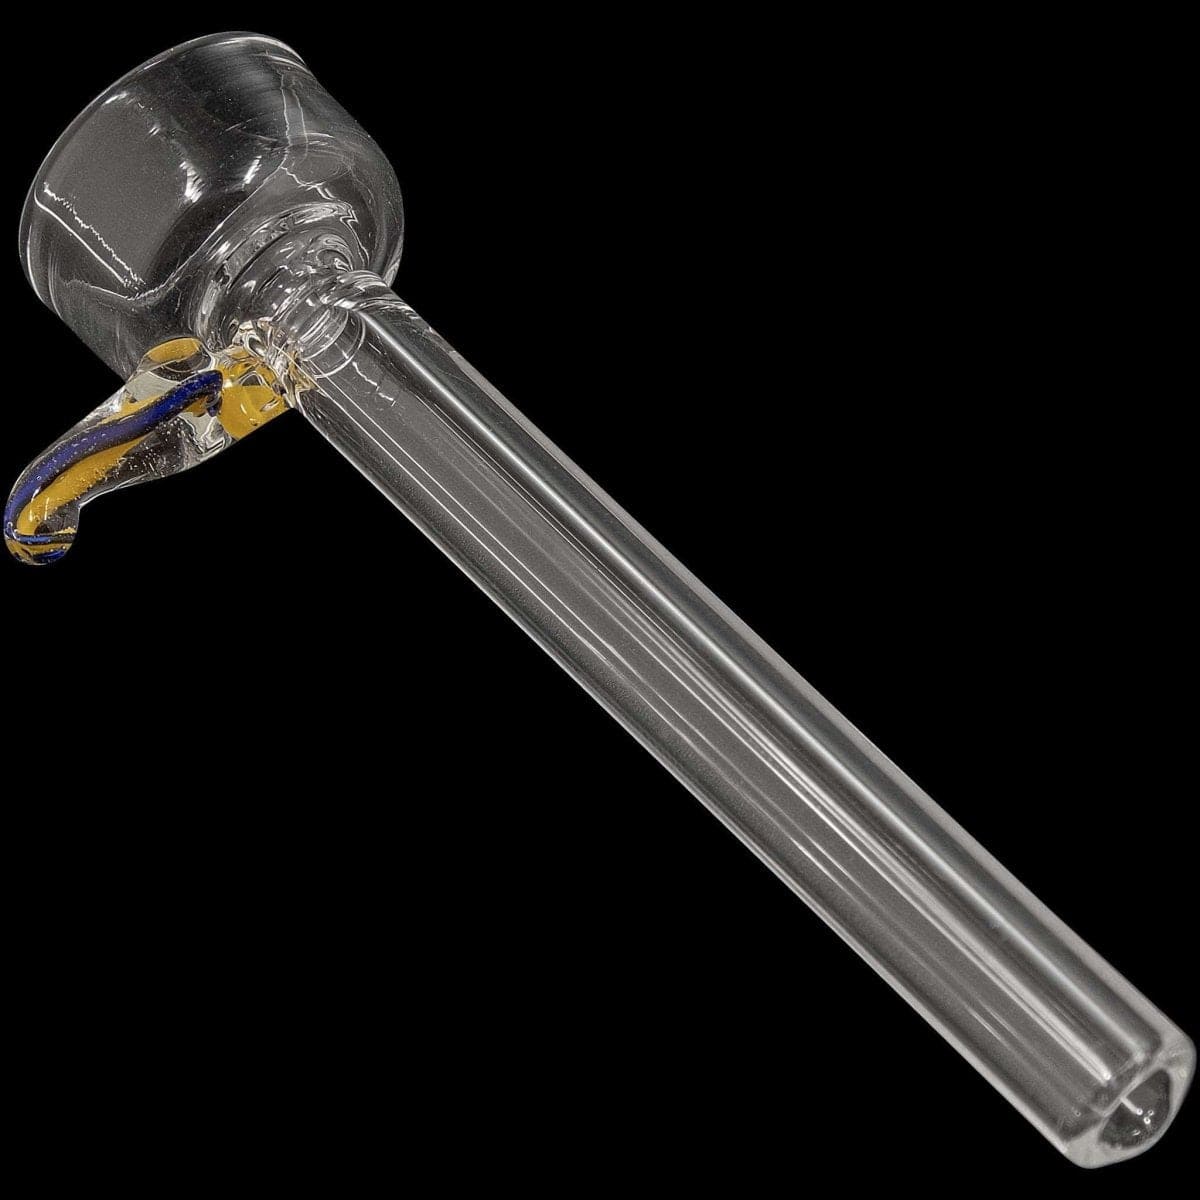 LA Pipes Smoking Accessory Amber 9mm Clear Slide Bowl w/ Color Handle for Pull-Stem Bongs